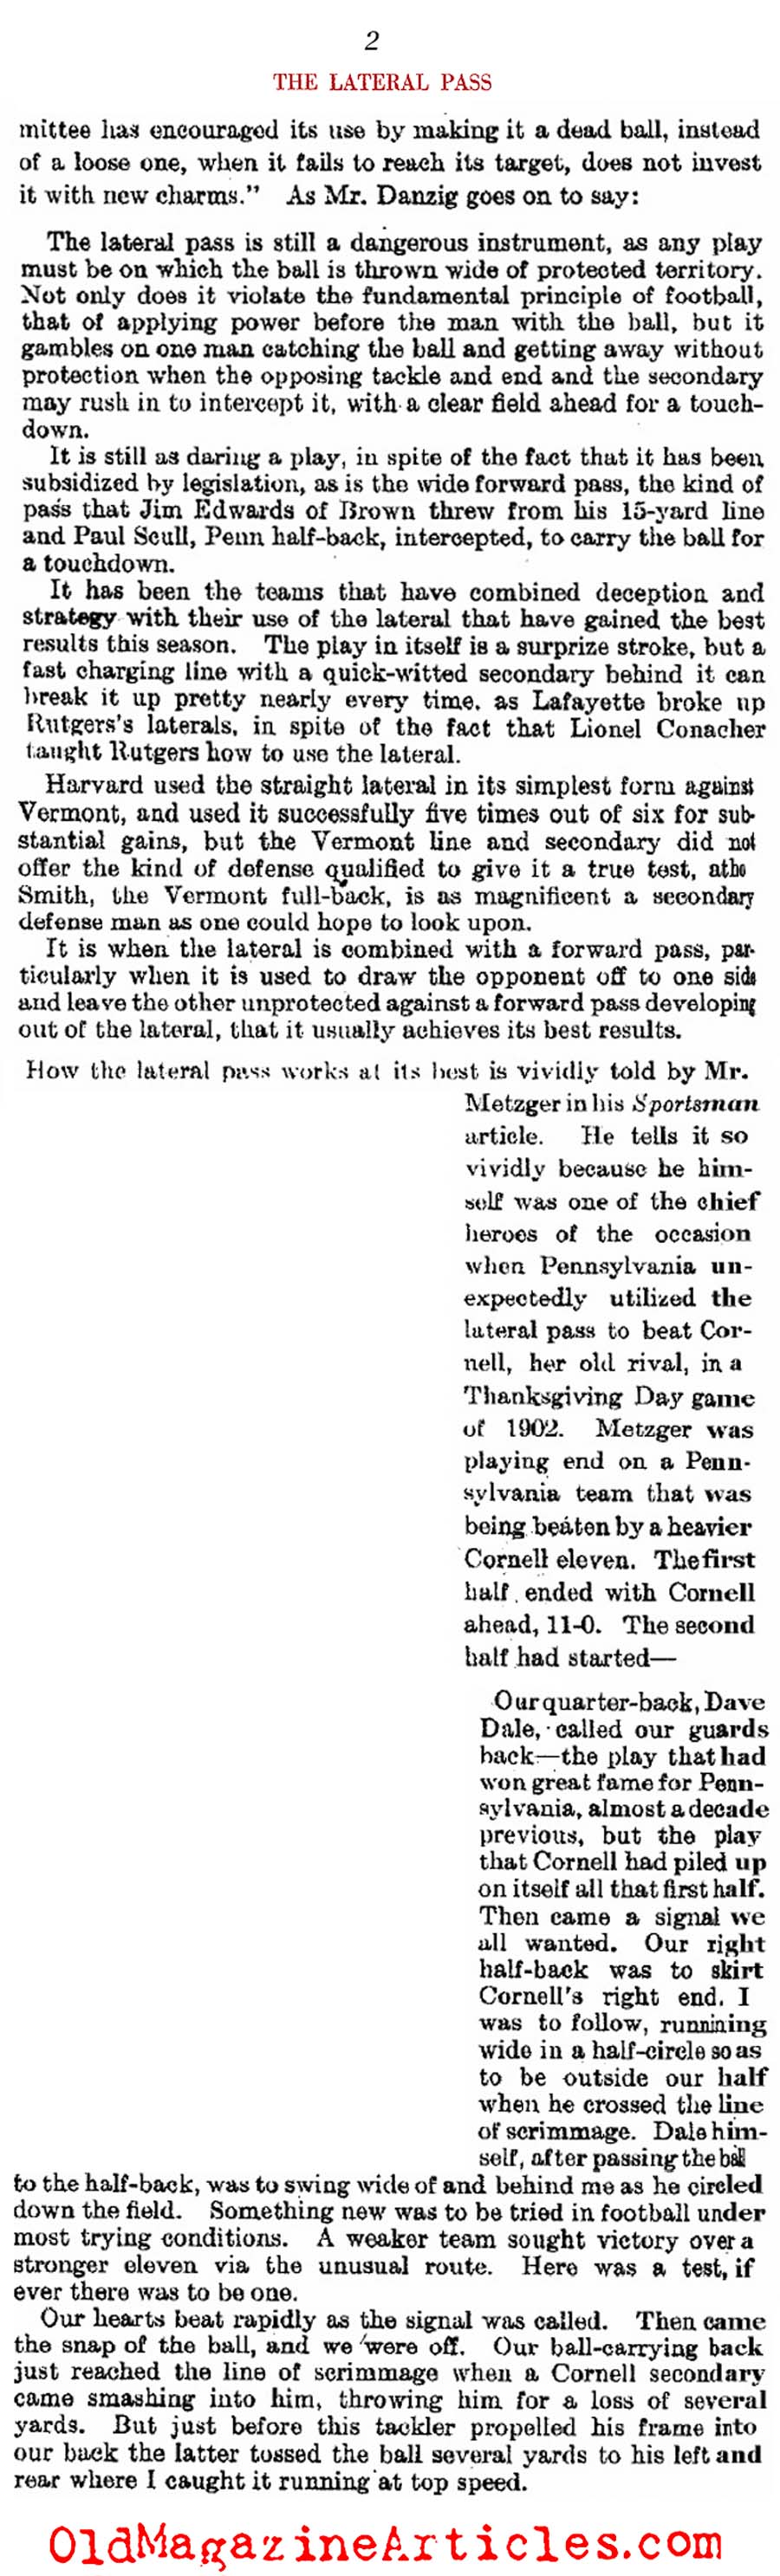 The Invention of Football's Lateral Pass (Literary Digest, 1927)